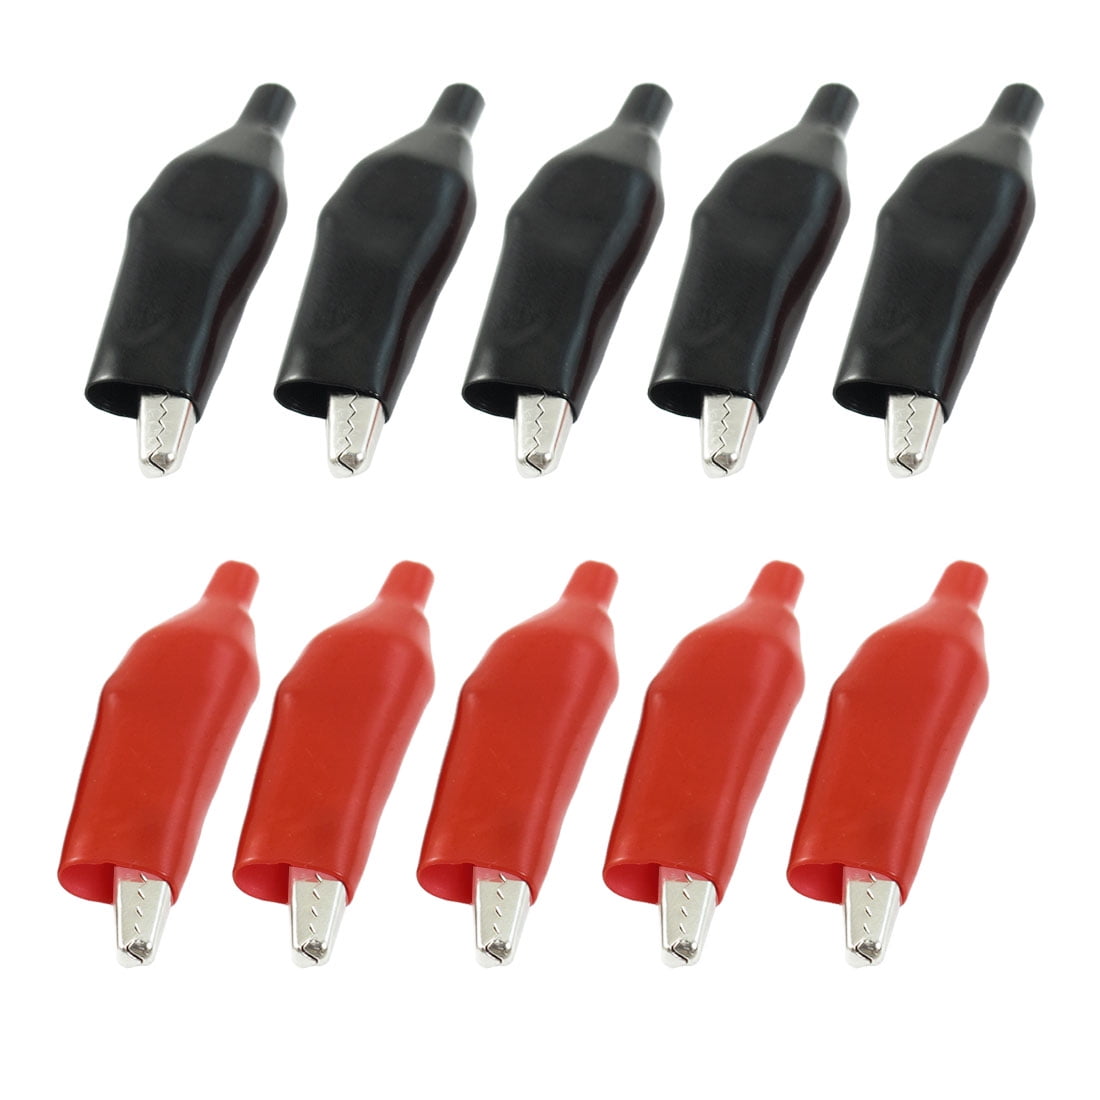 10 Pcs/kit Black Red Alligator Clips Crocodile Battery Charger Clamps Test Leads 